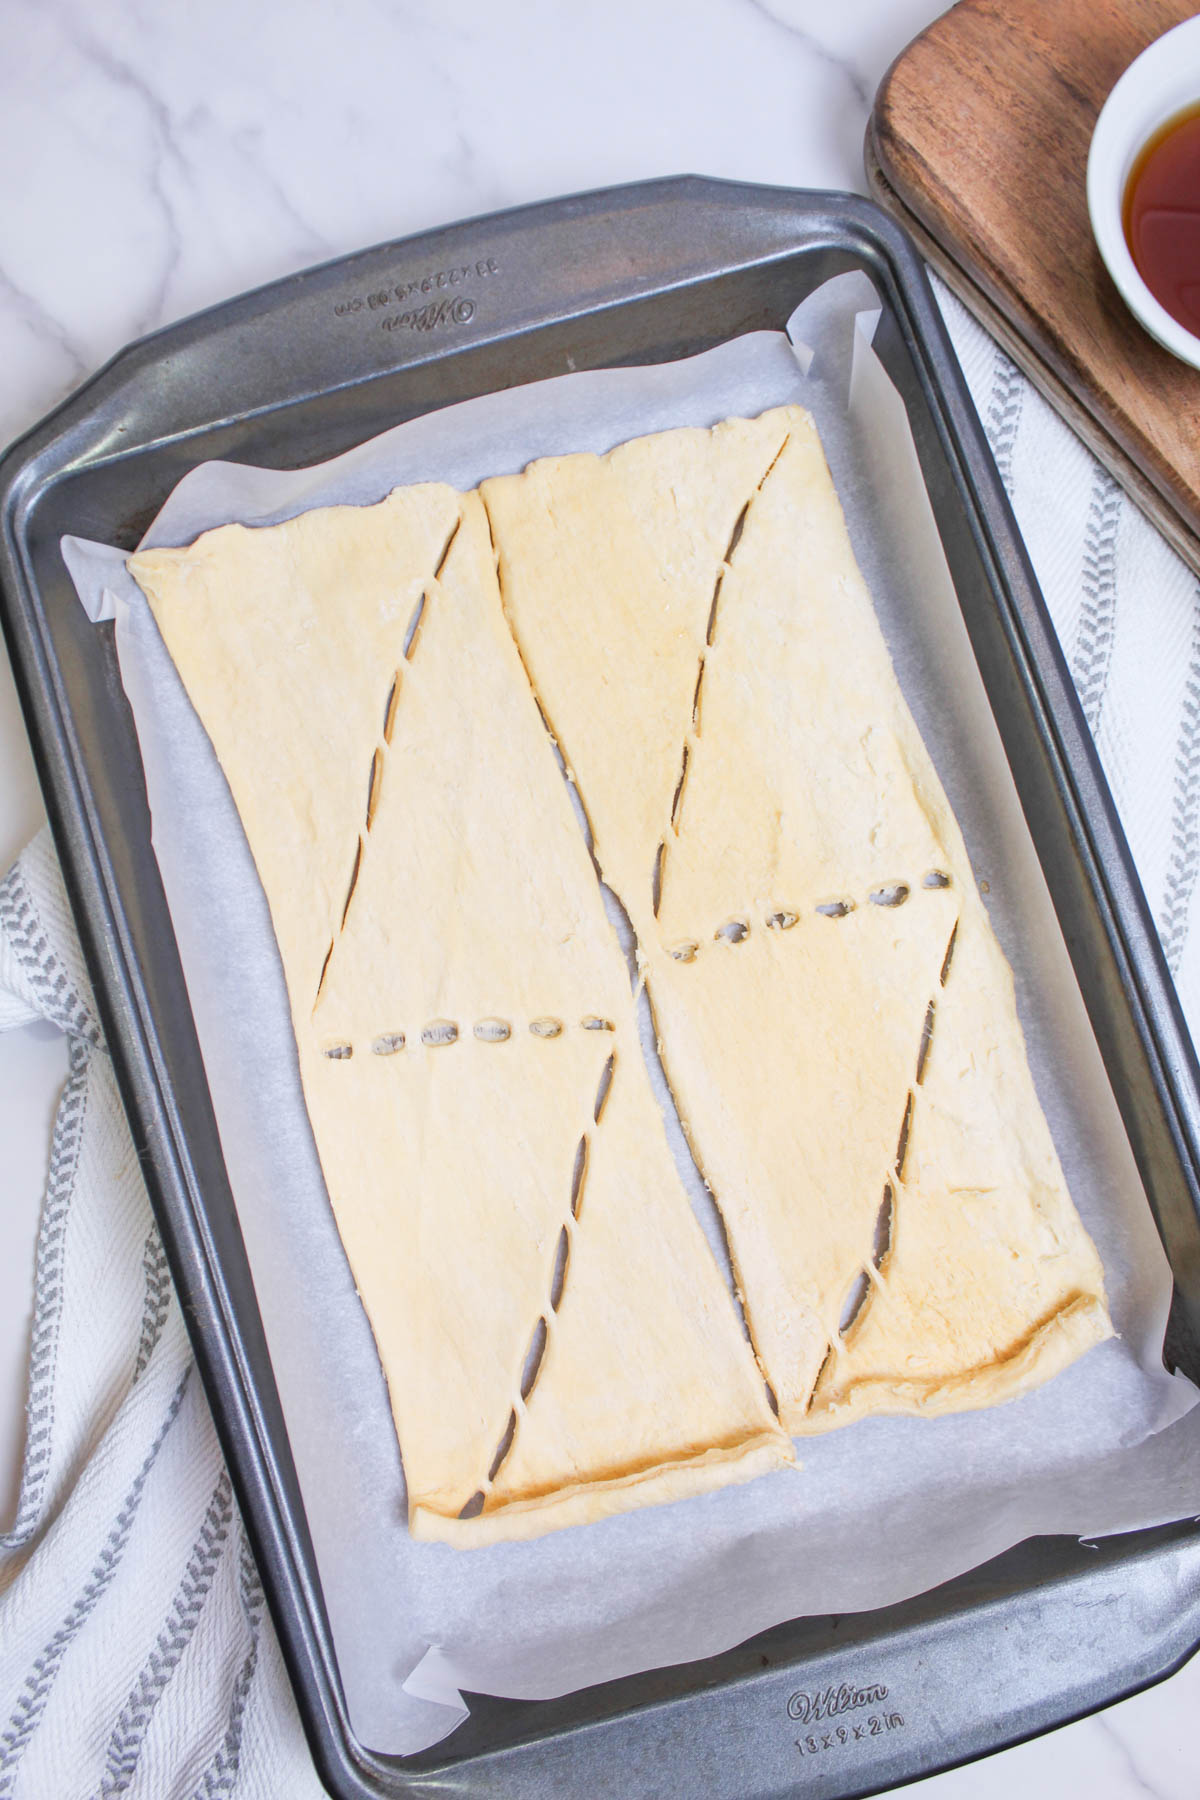 A baking sheet with a piece of pastry on it.